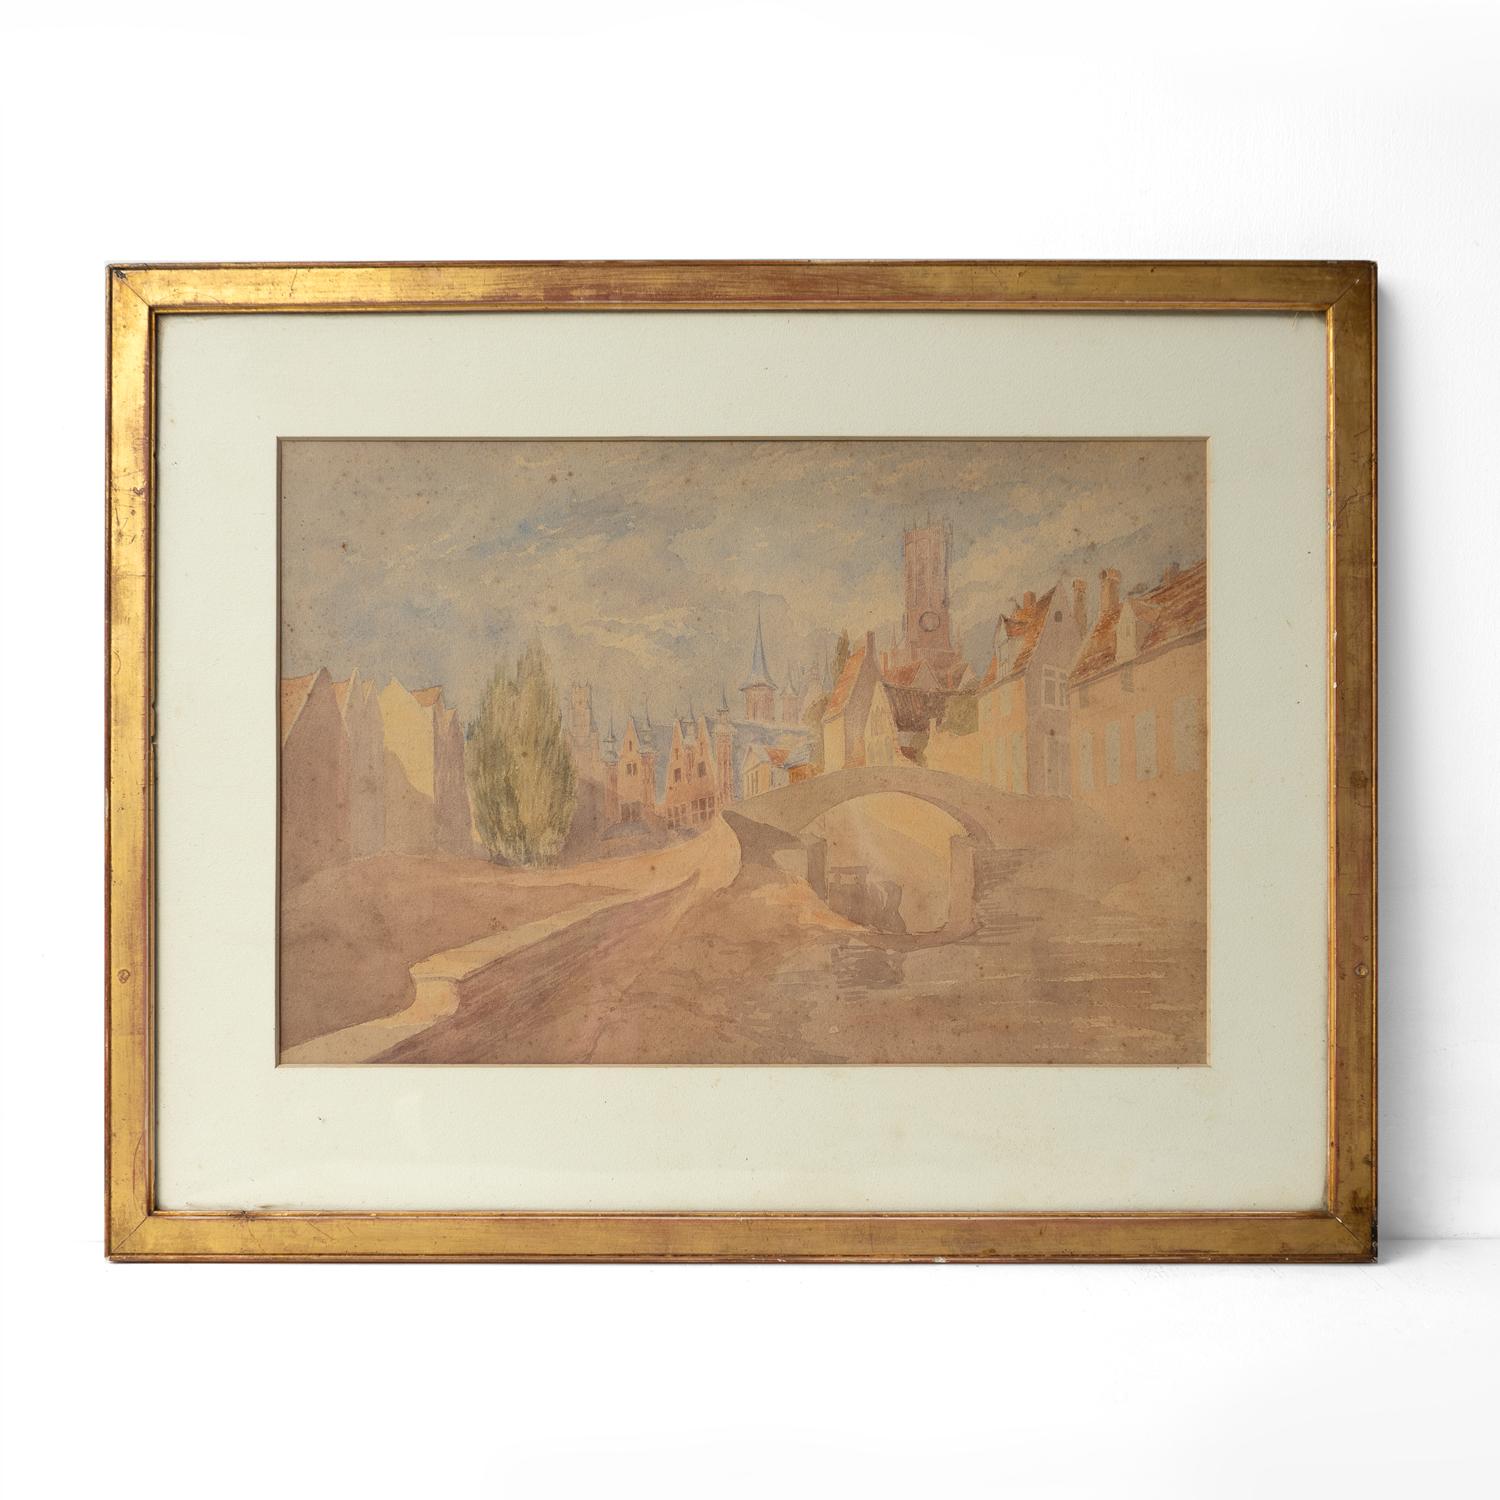 ANTIQUE ORIGINAL FRAMED BELGIAN WATERCOLOUR PAINTING
Depicting a view of Bruges, looking down the Groenerei Canal over the steep rooftops towards the dominating medieval Belfry Tower.

Painted skilfully capturing light and shade extremely well and